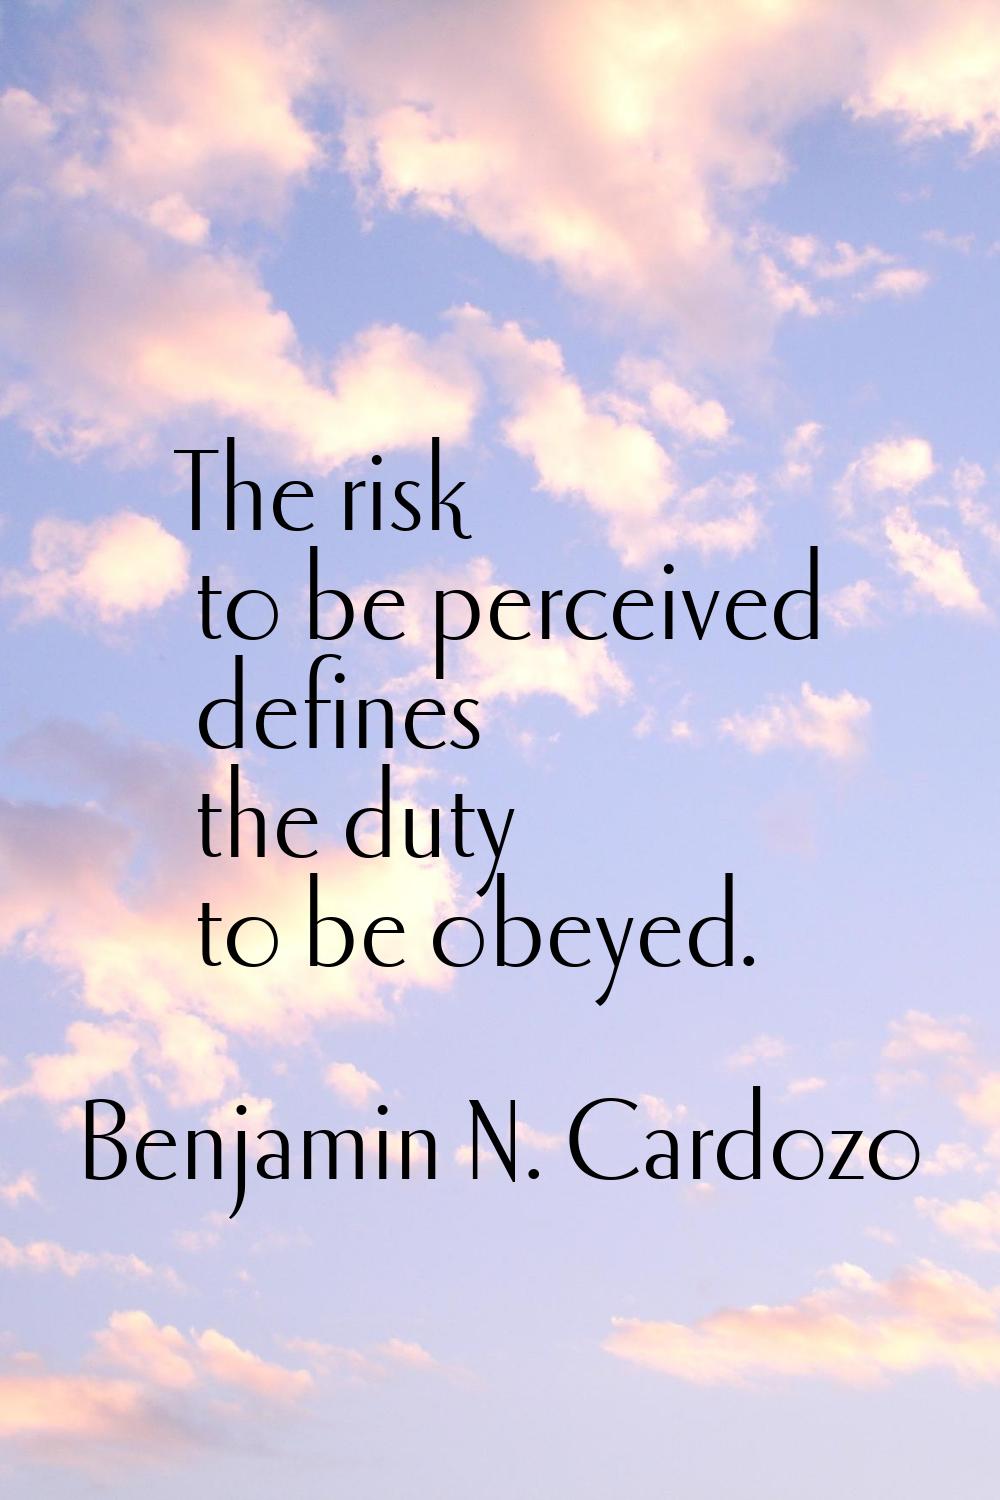 The risk to be perceived defines the duty to be obeyed.